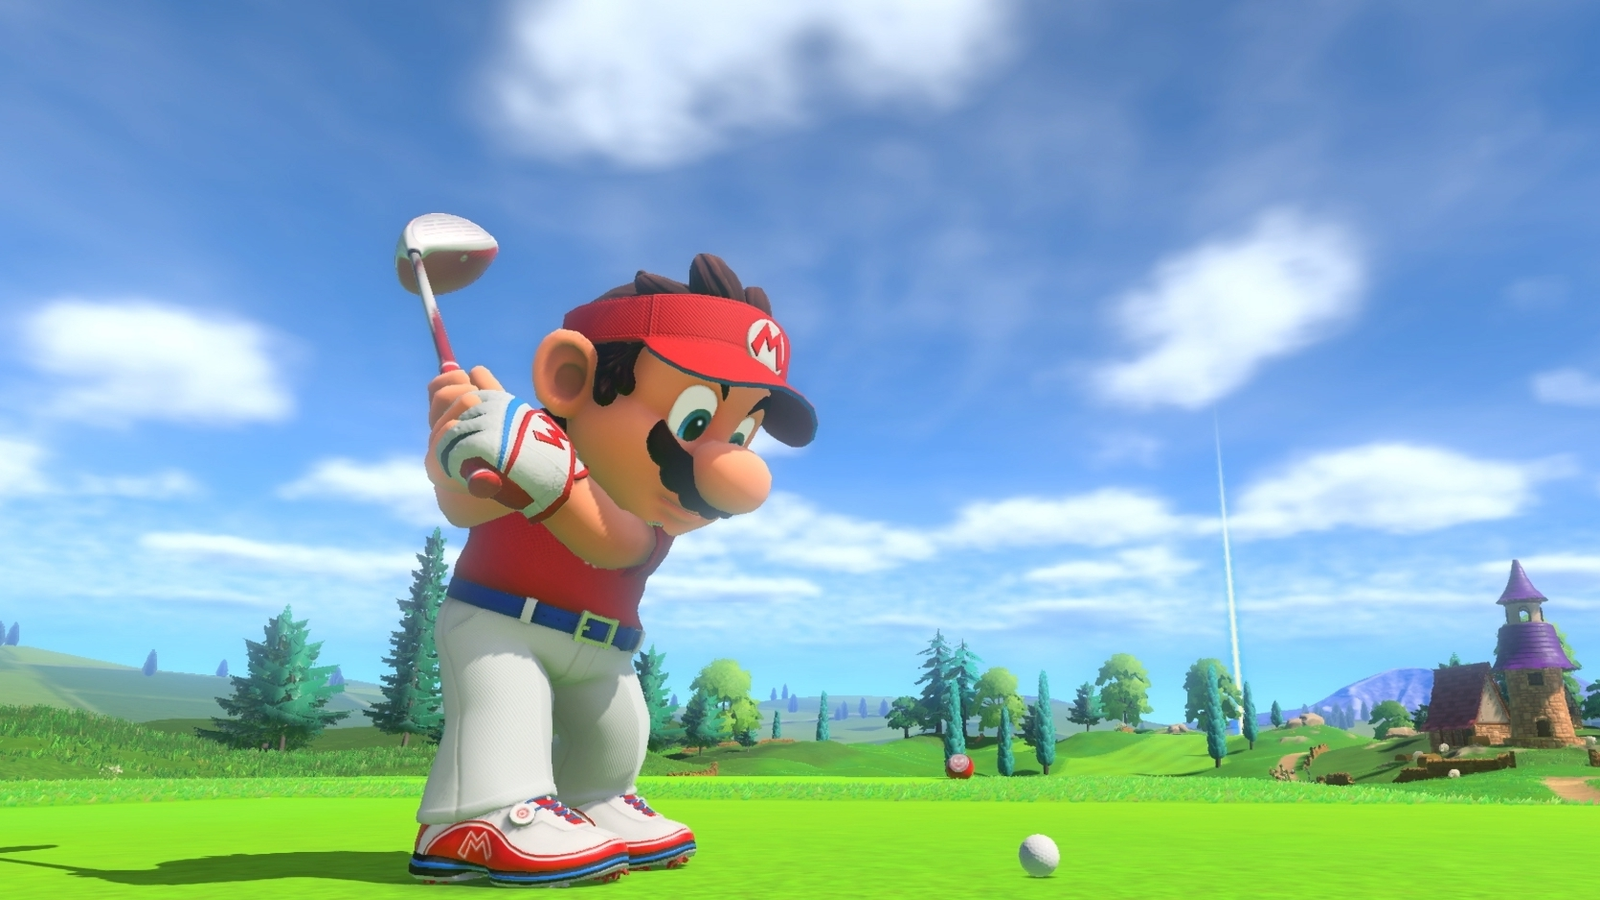 Mario Golf: Super Rush - 7 minutes of footage, including a look at